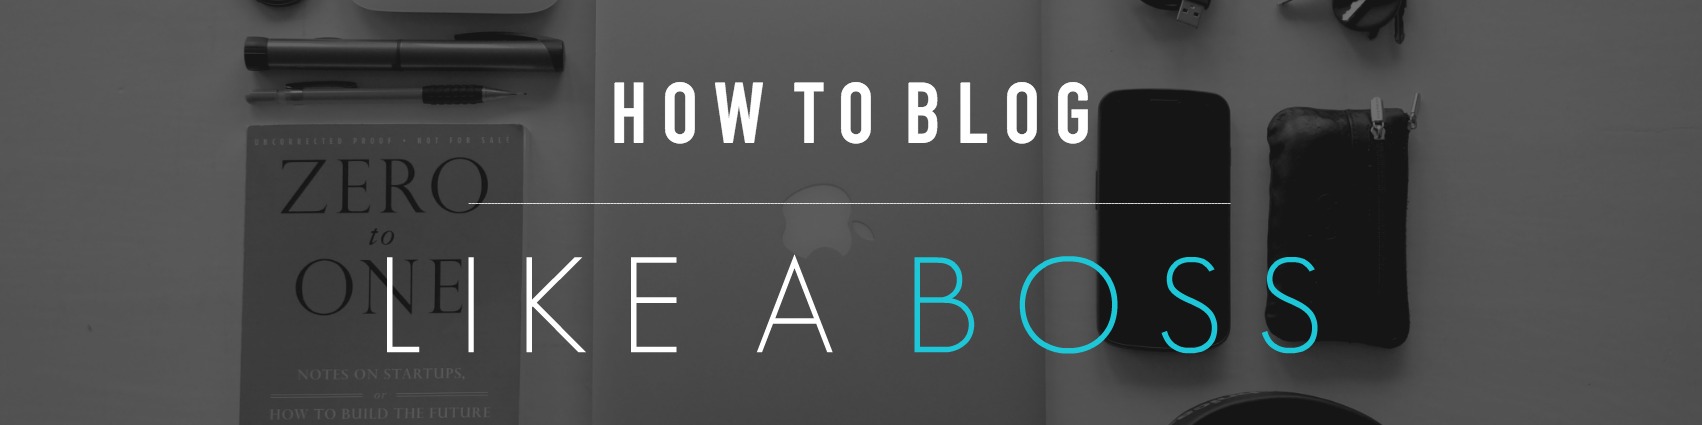 Bloggers' Guide